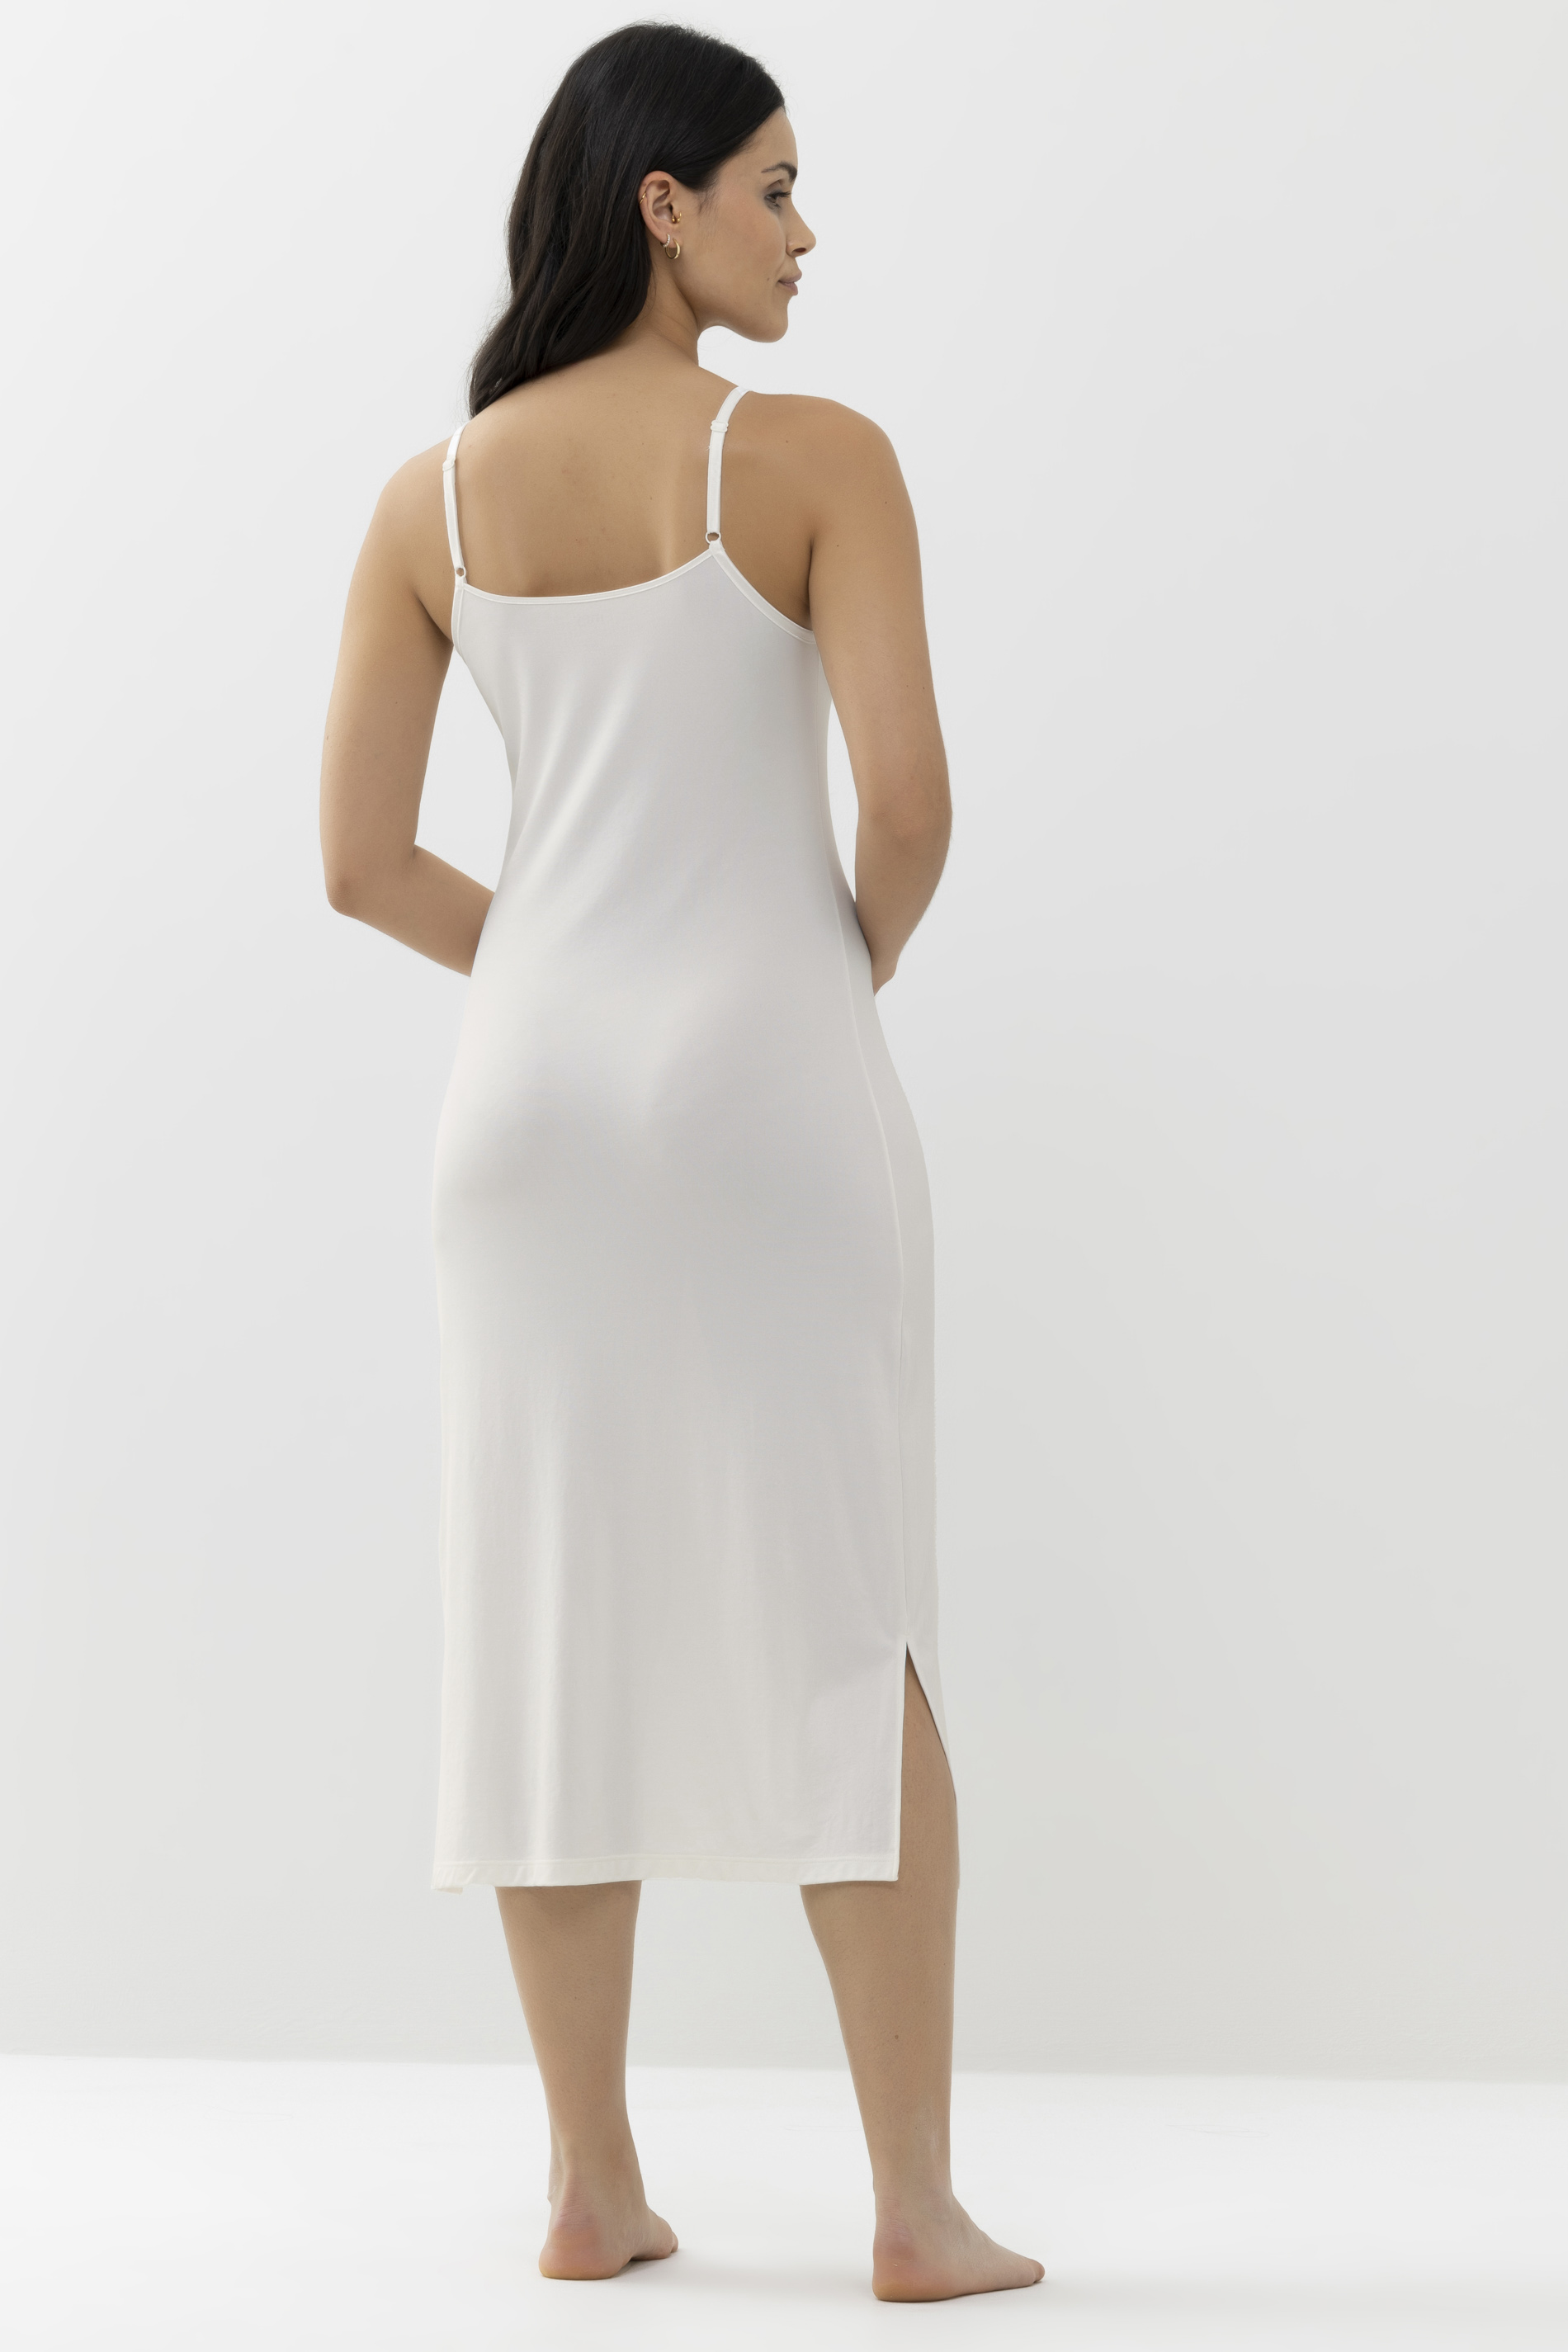 Body dress Champagner Serie Emotion Rear View | mey®